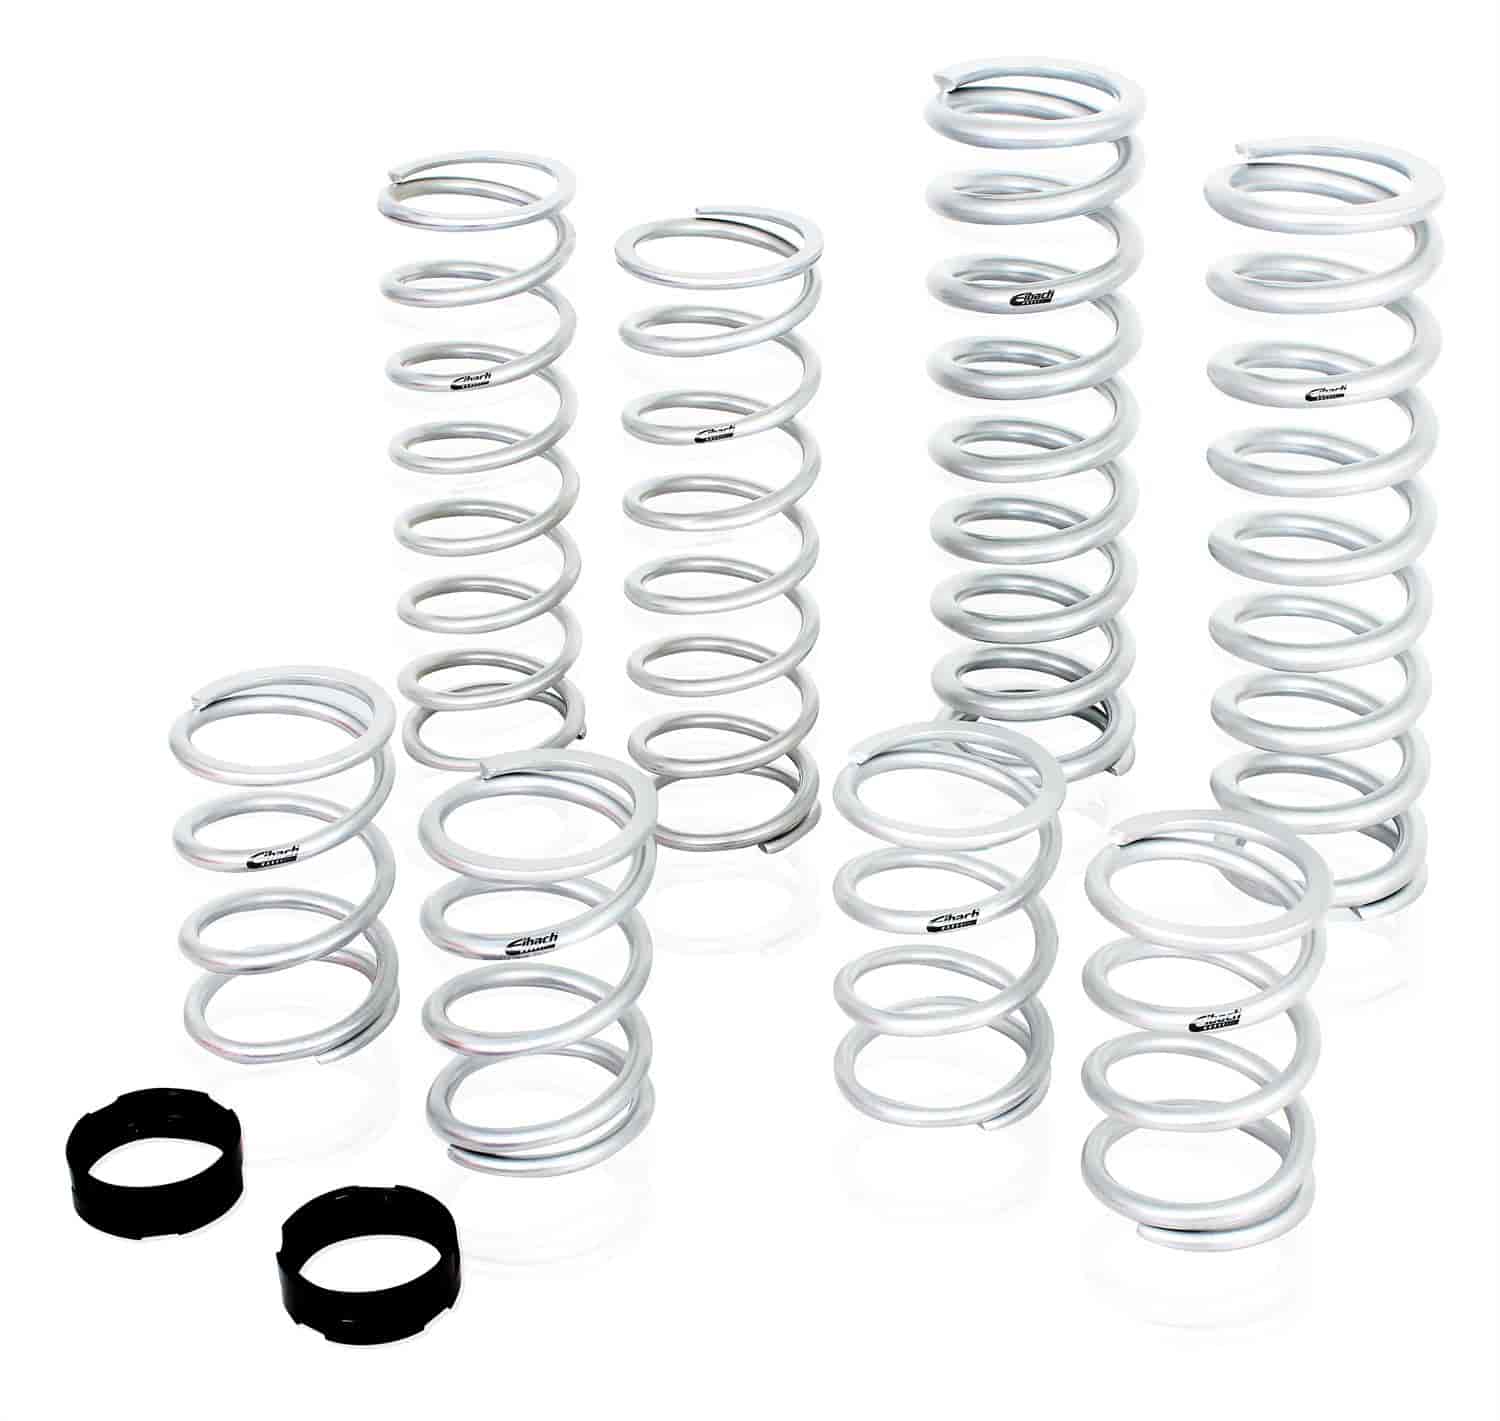 E85-212-002-02-22 Spring Kit Can-am Maverick Turbo 1000cc 2015 to 2016 4 Seater Stage 2 PERFORMANCE kit for OE Fox Sho